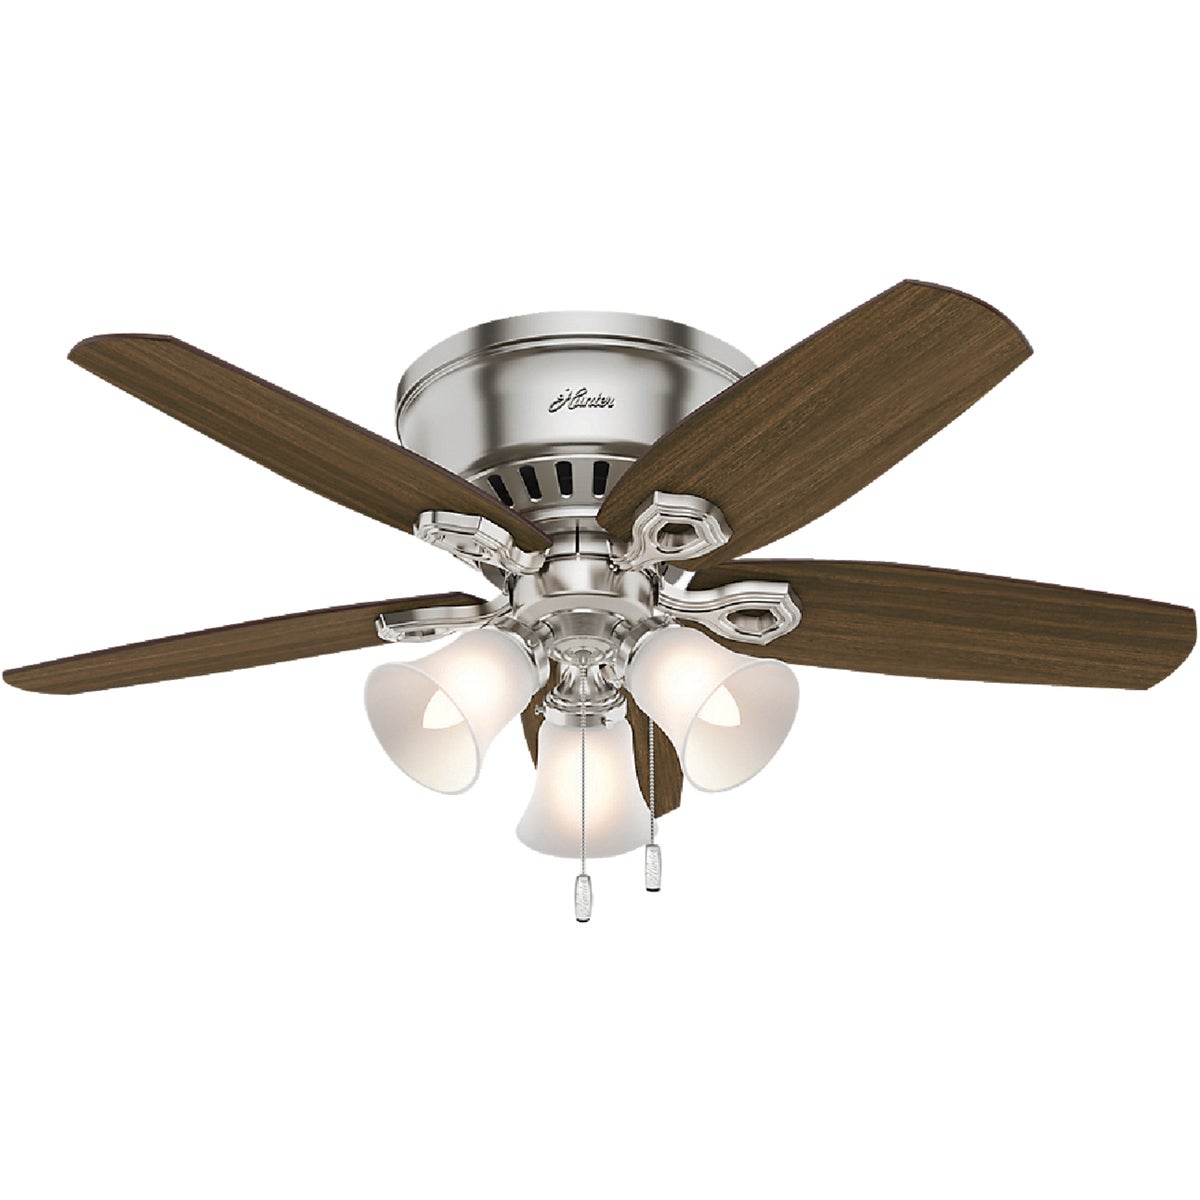 Item 502374, Low profile ceiling fan fits flush to the ceiling making it ideal for rooms